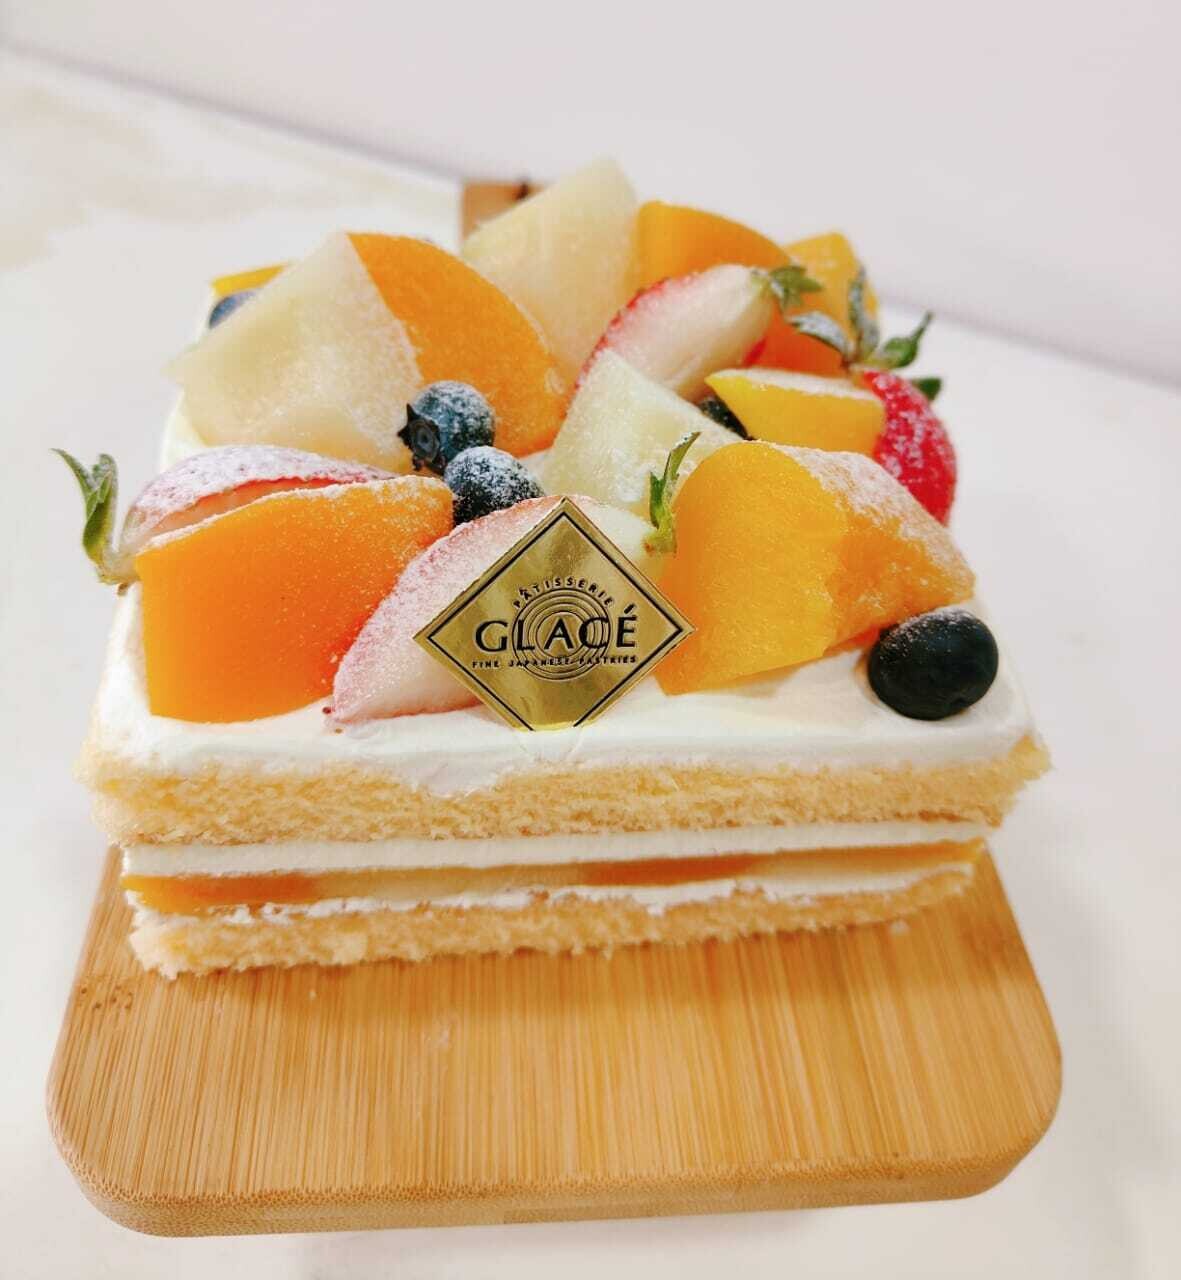 Mixed Fruits Deluxe ミックスフルーツデラックス